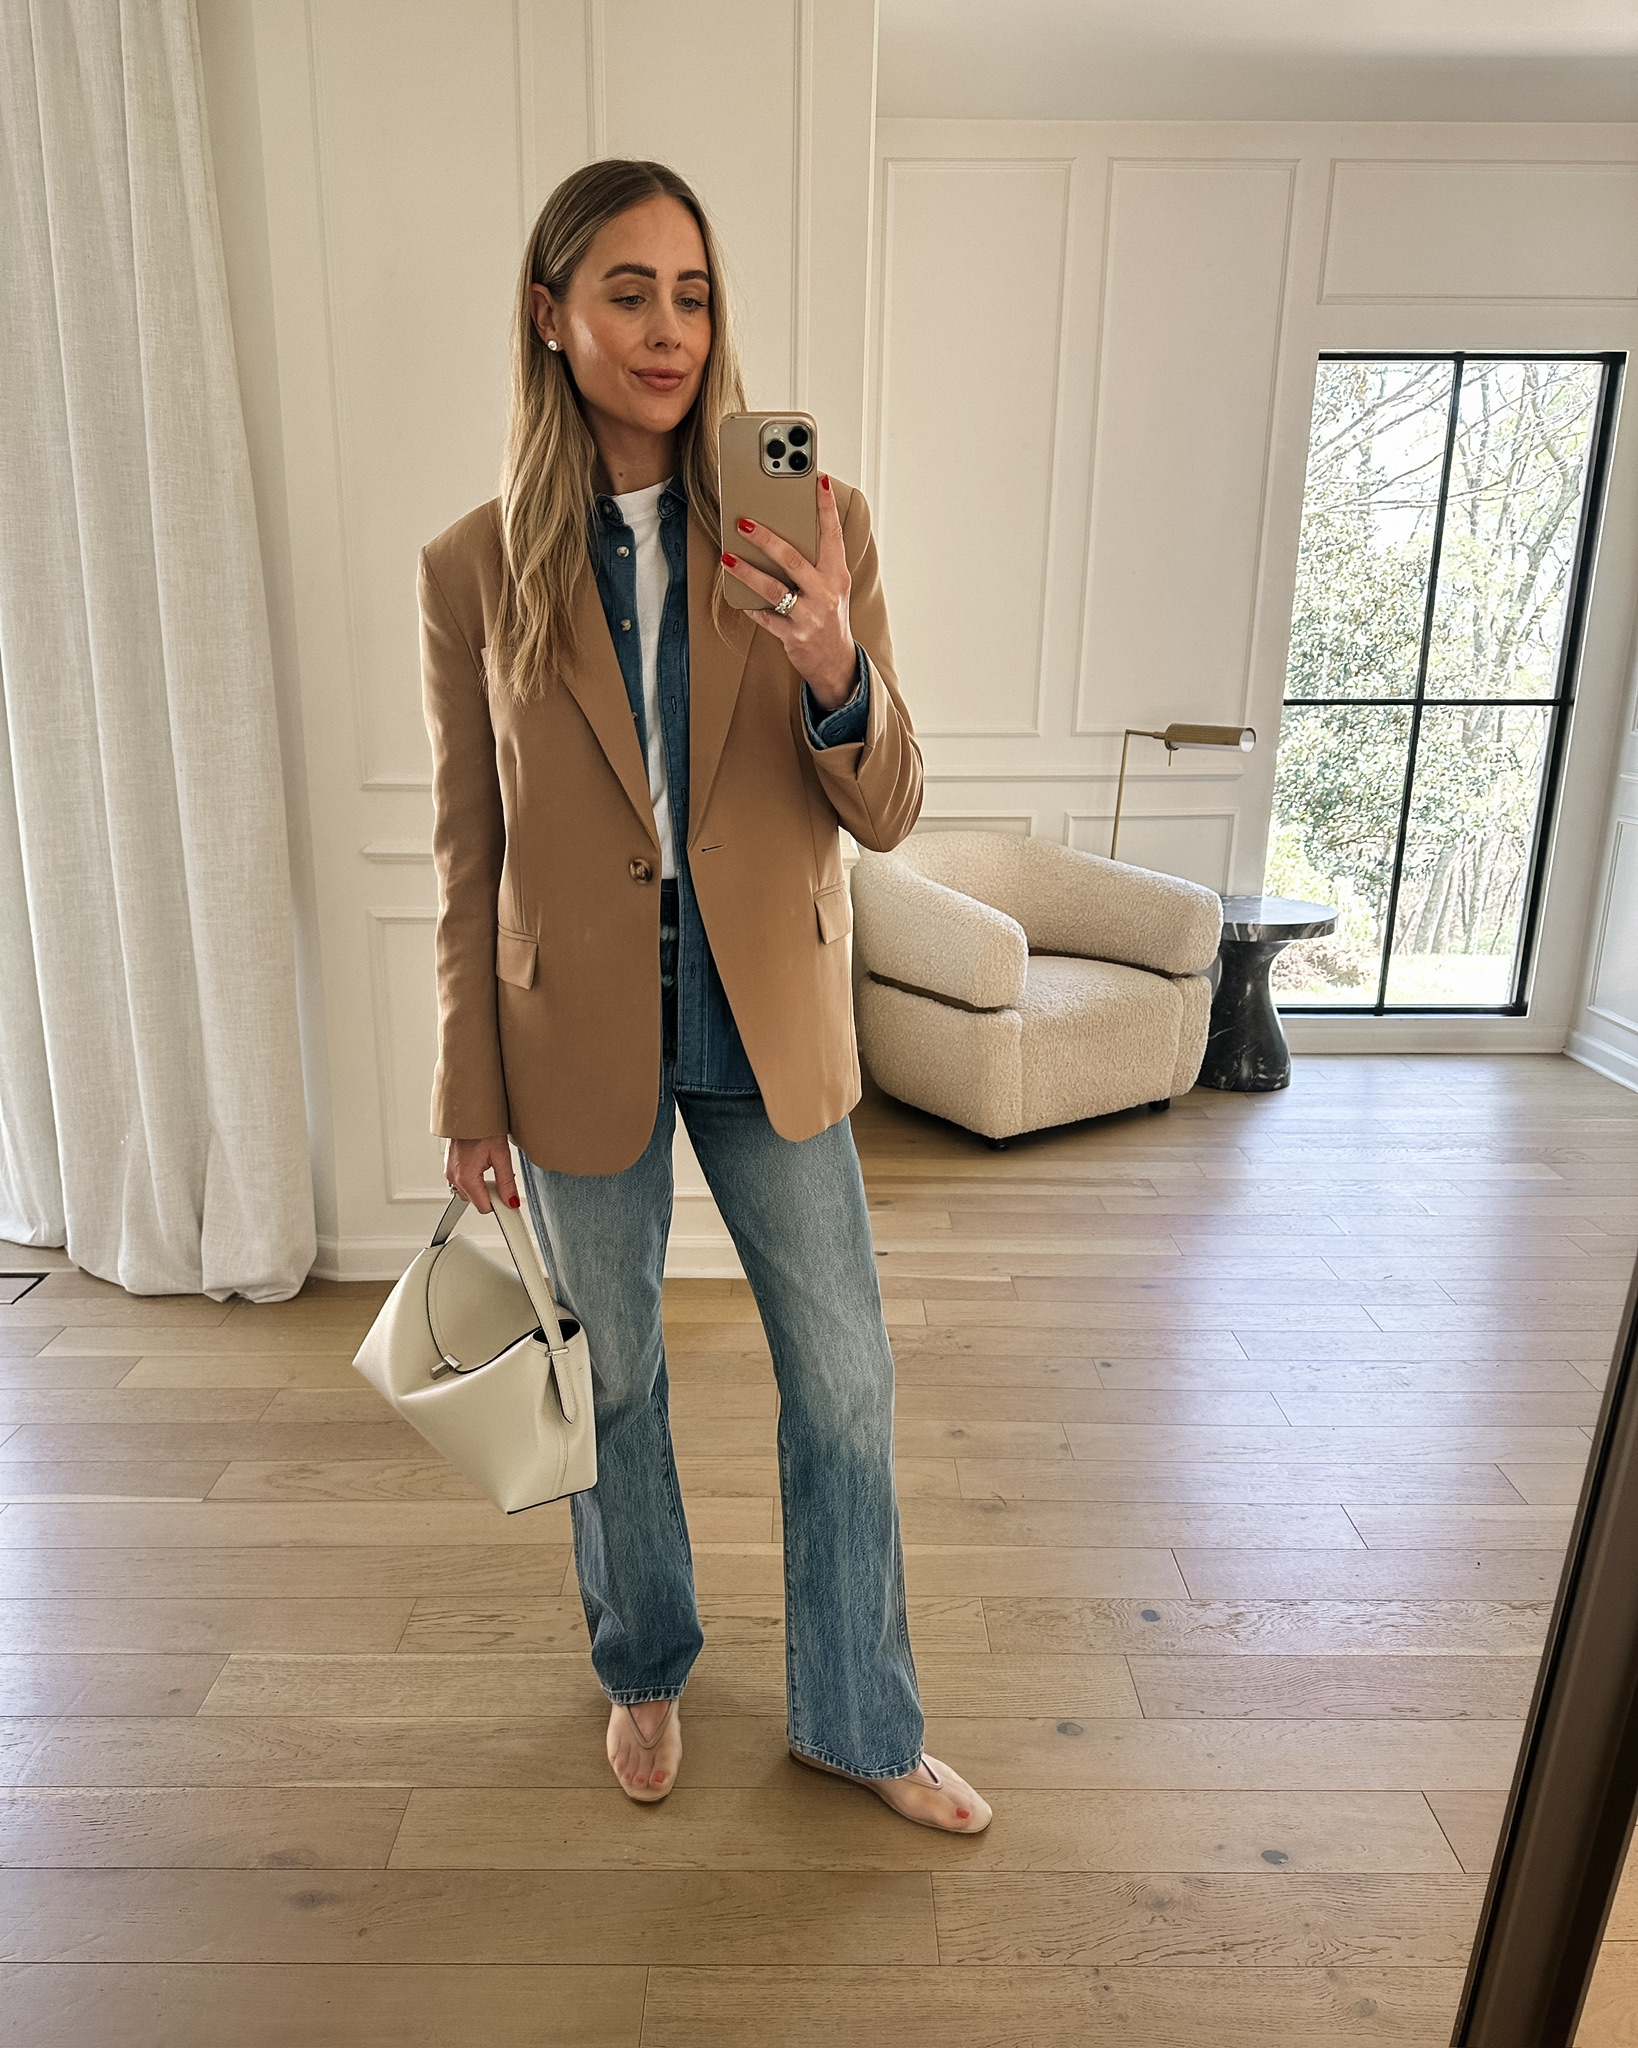 Fashion Jackson wearing MAYSON the label camel blazer, denim button up shirt, jeans, sheer ballerina flats, spring look, chic office look